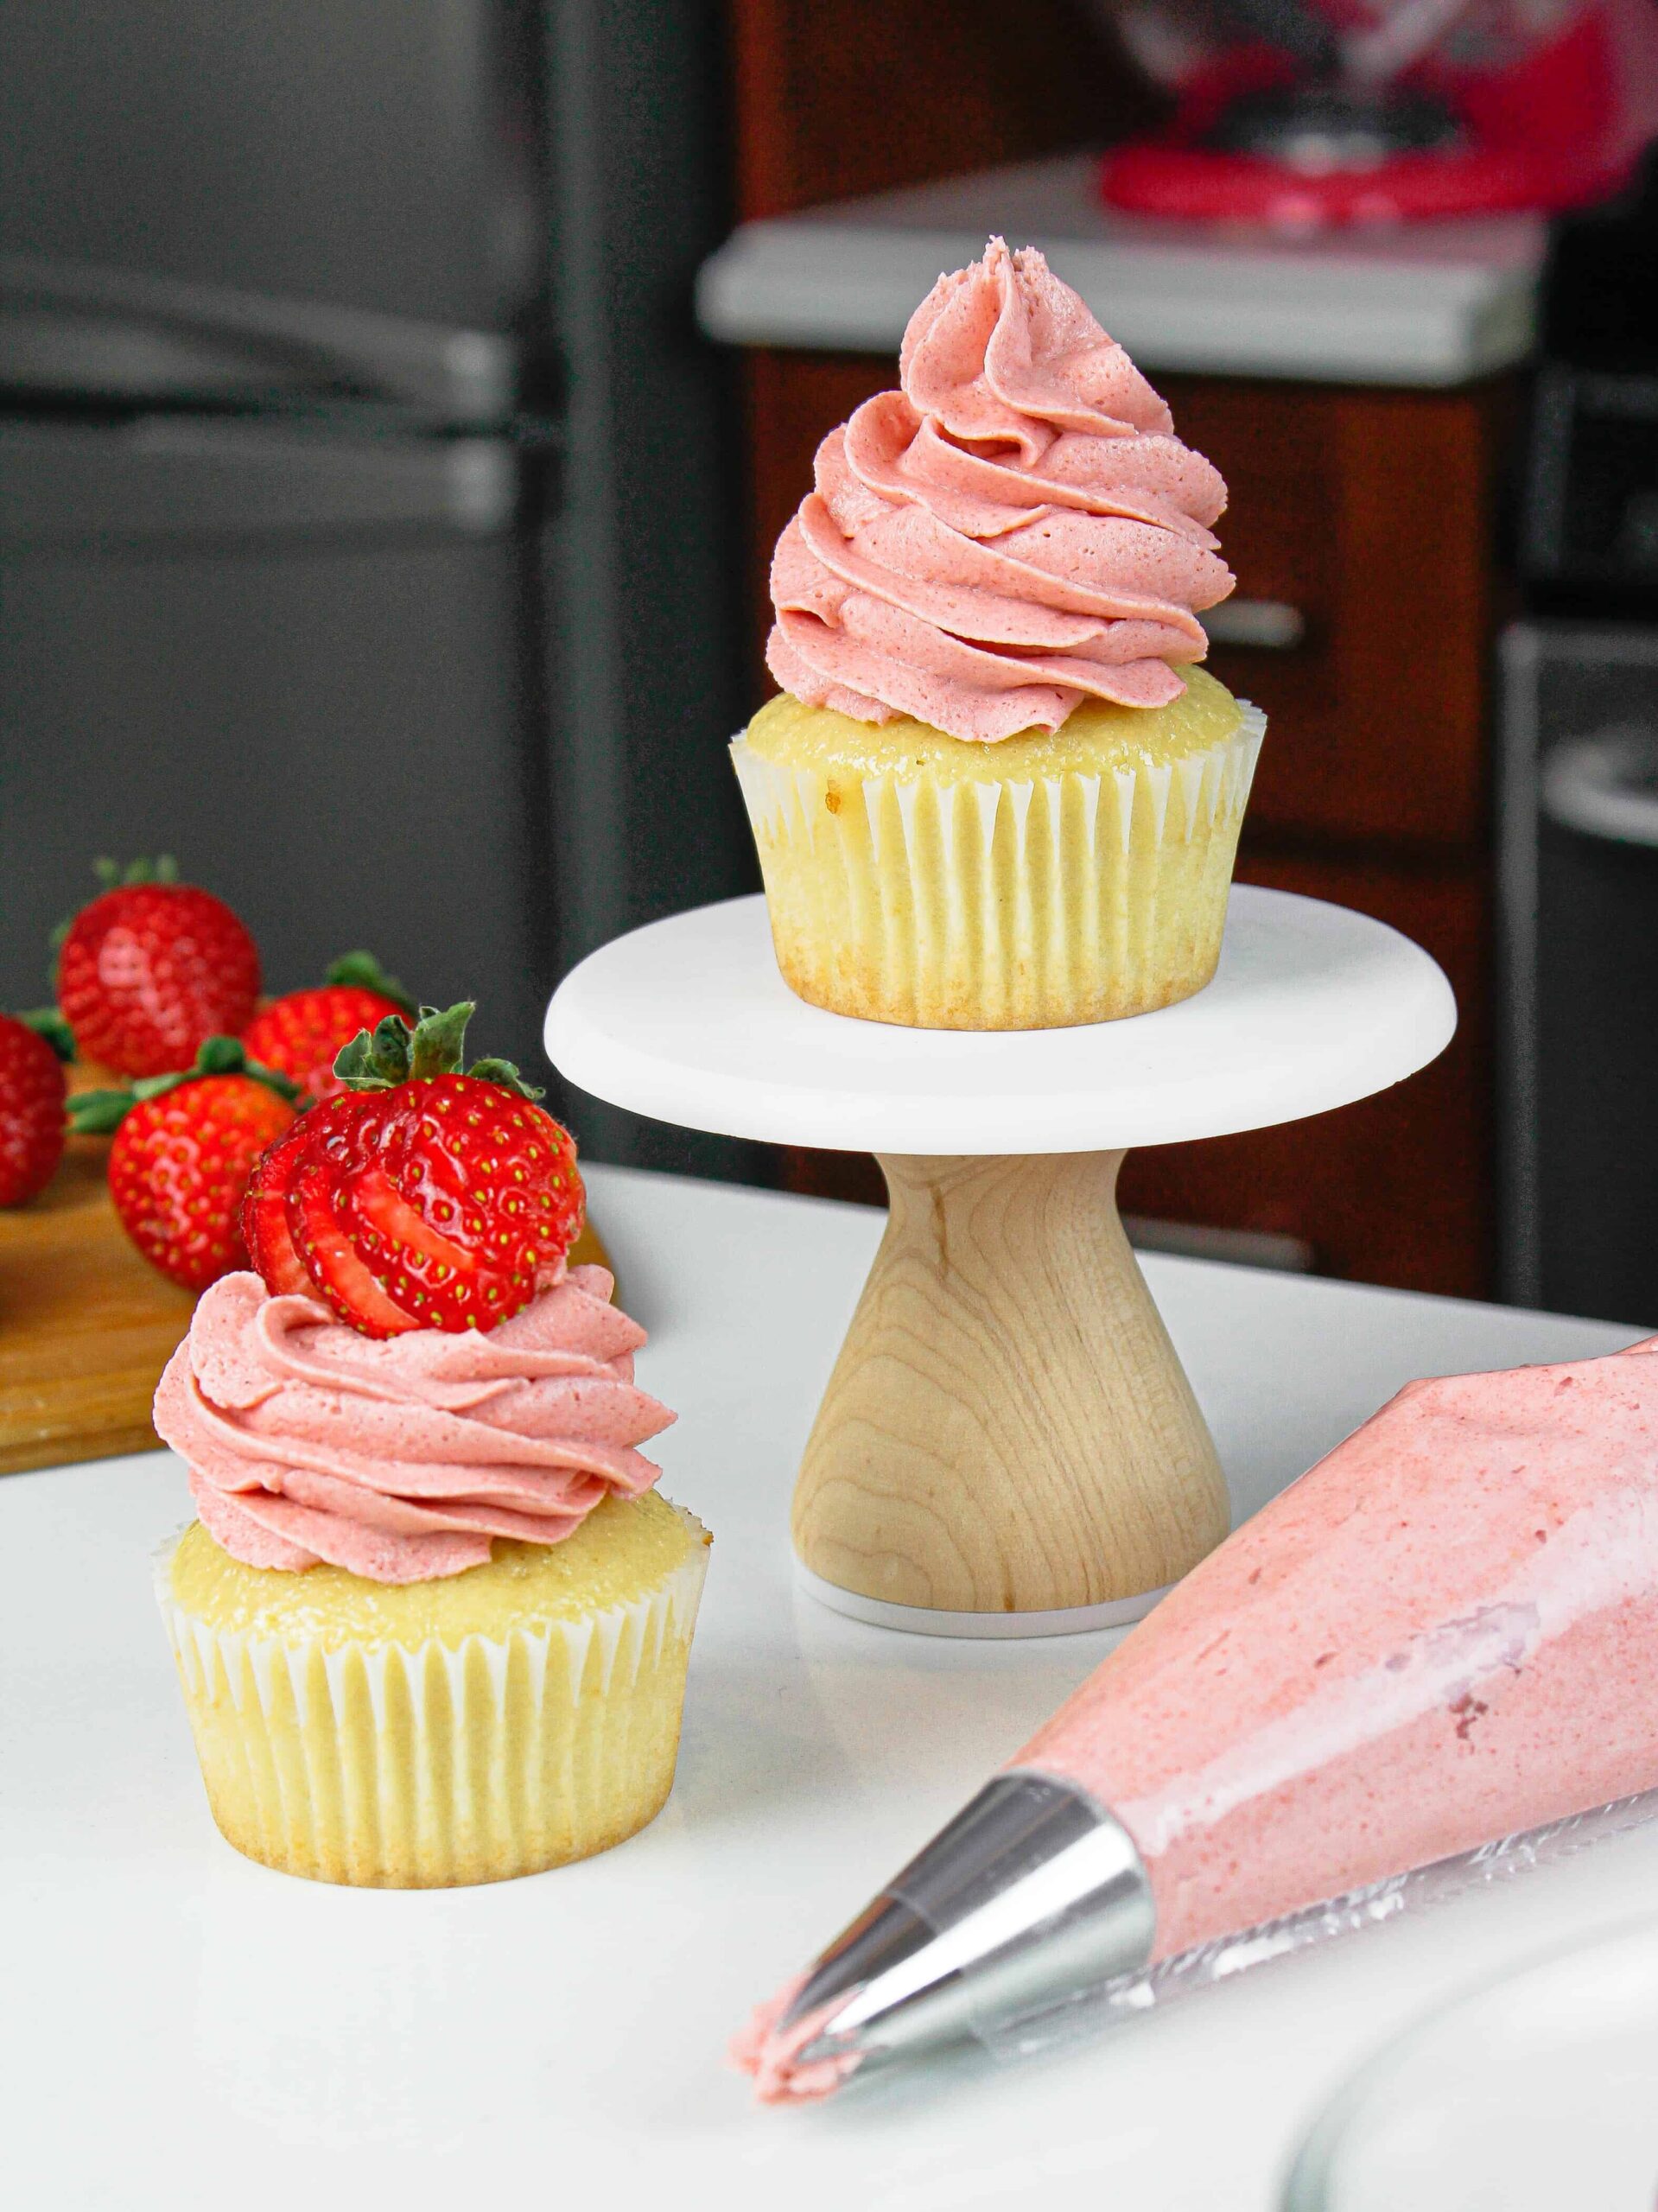 image of cupcakes with strawberry frosting piped on top